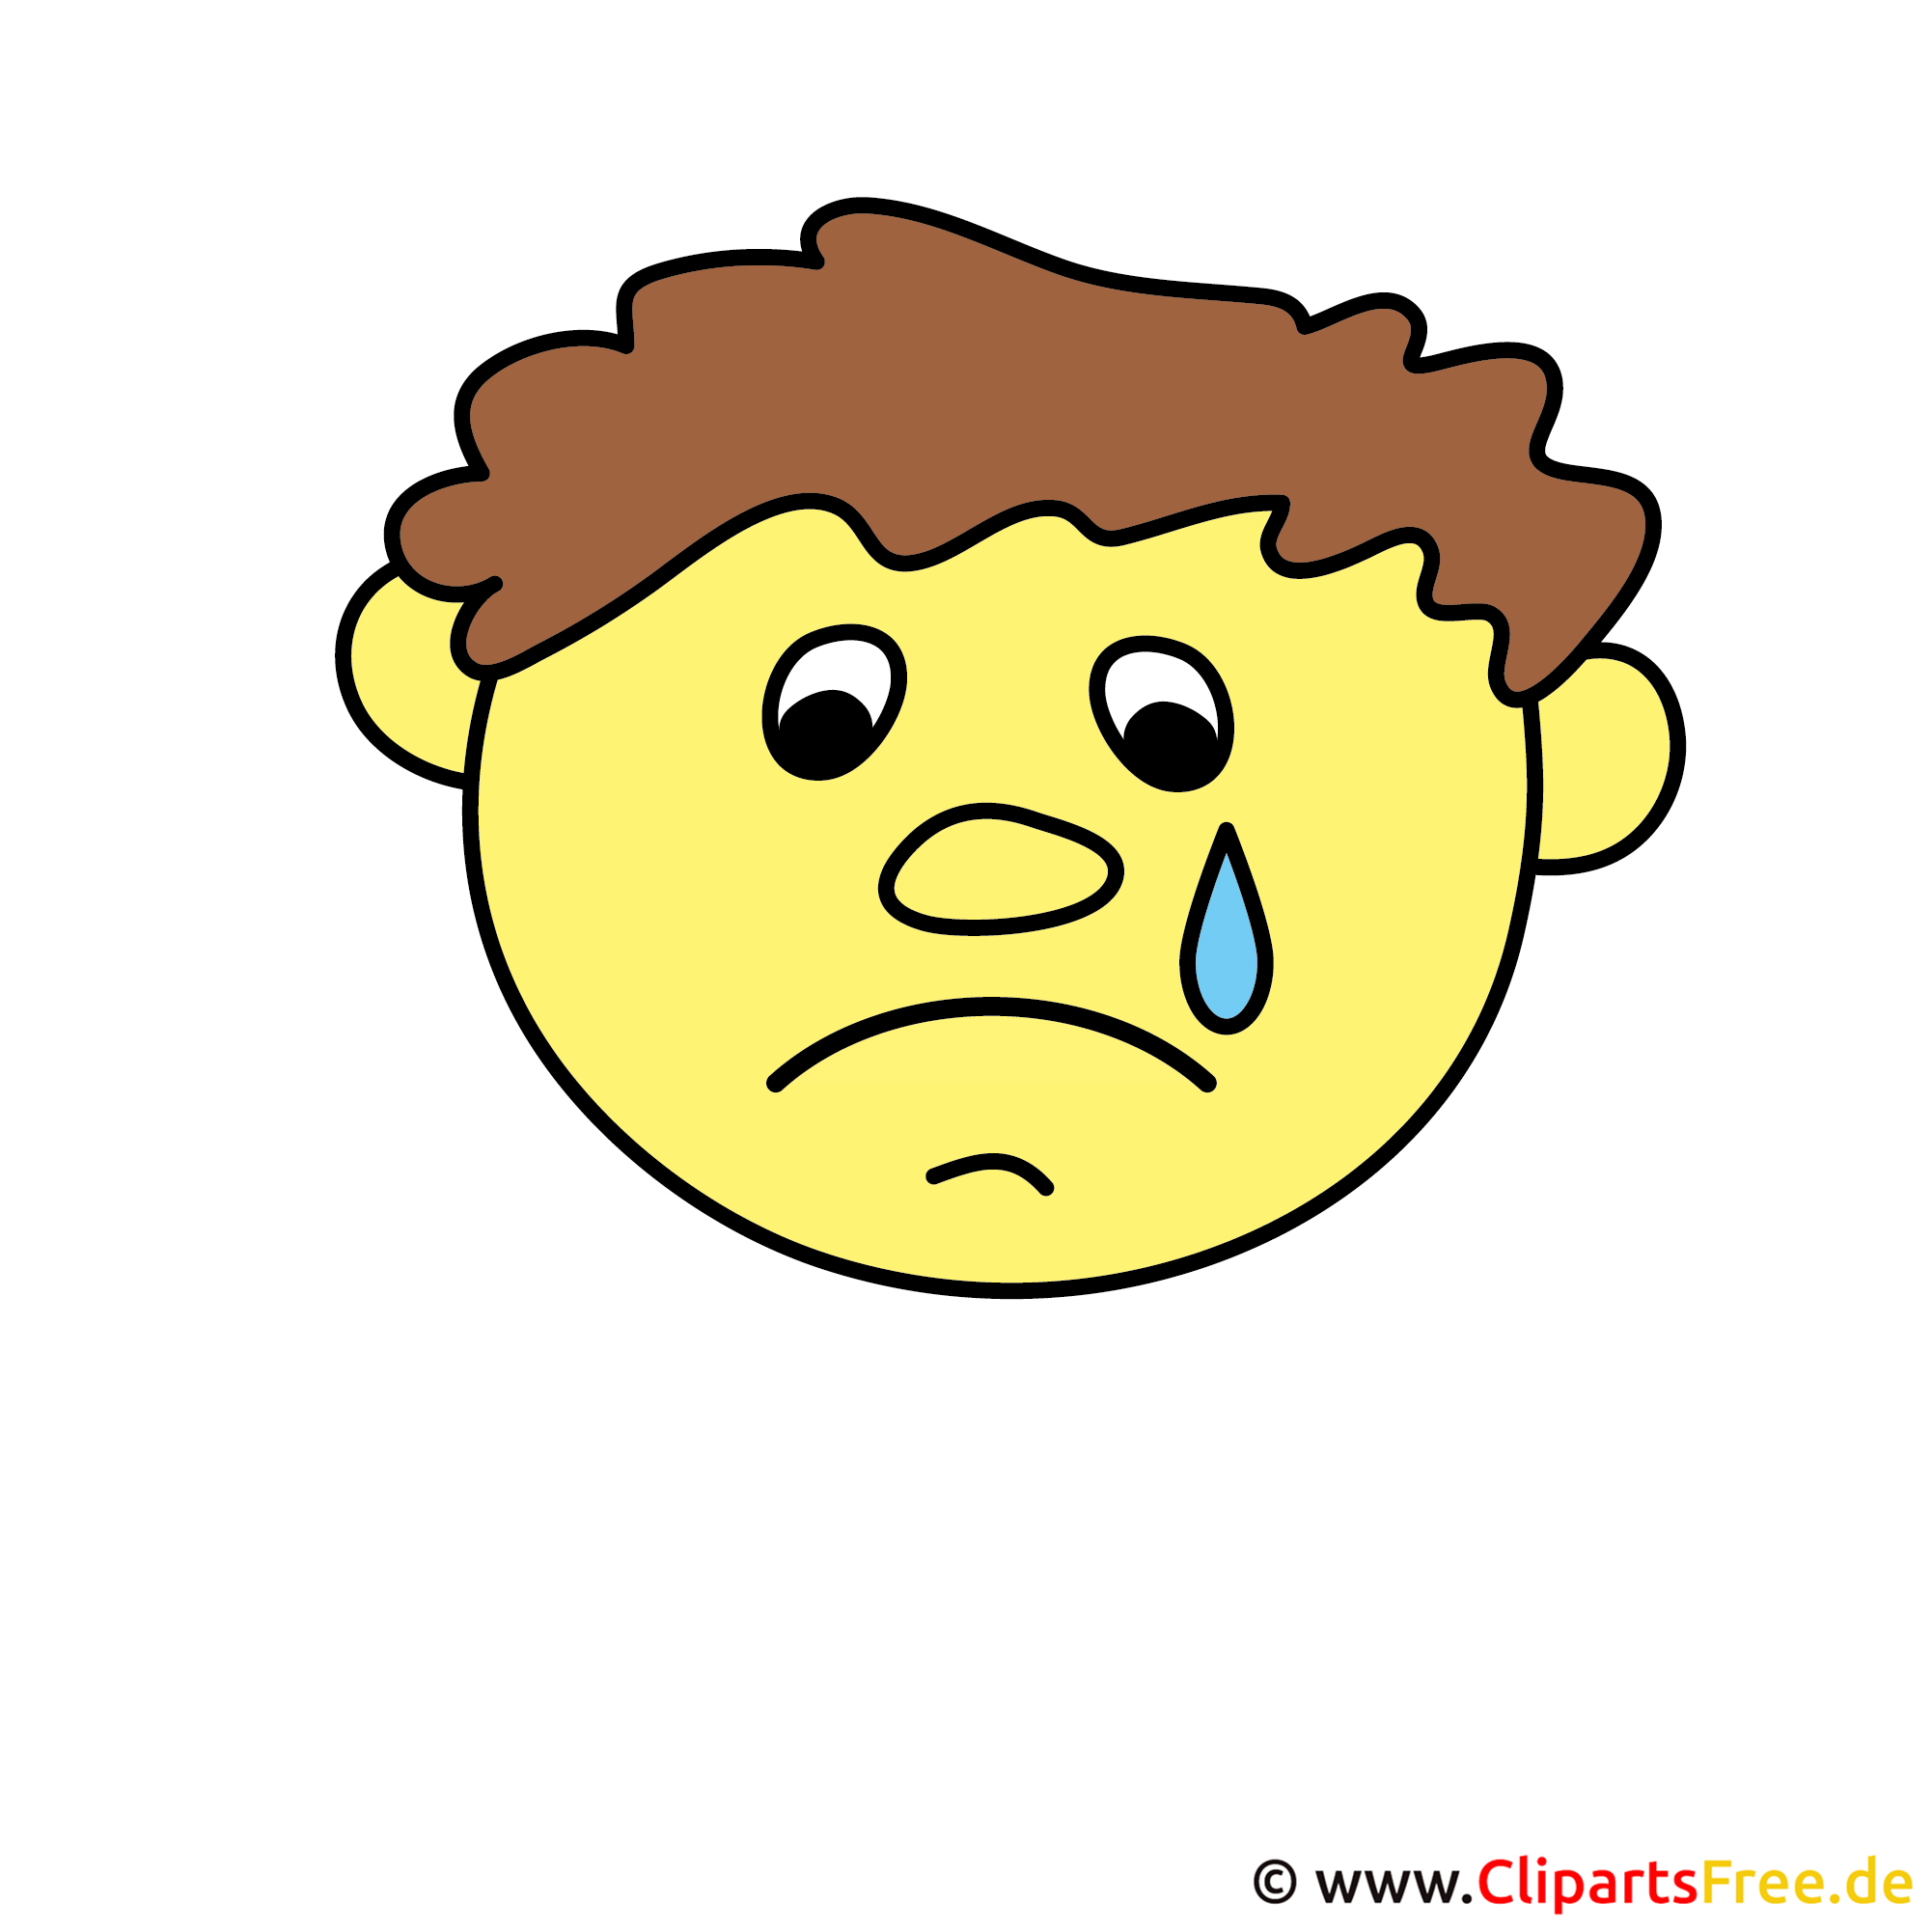 clipart smiley traurig - photo #33